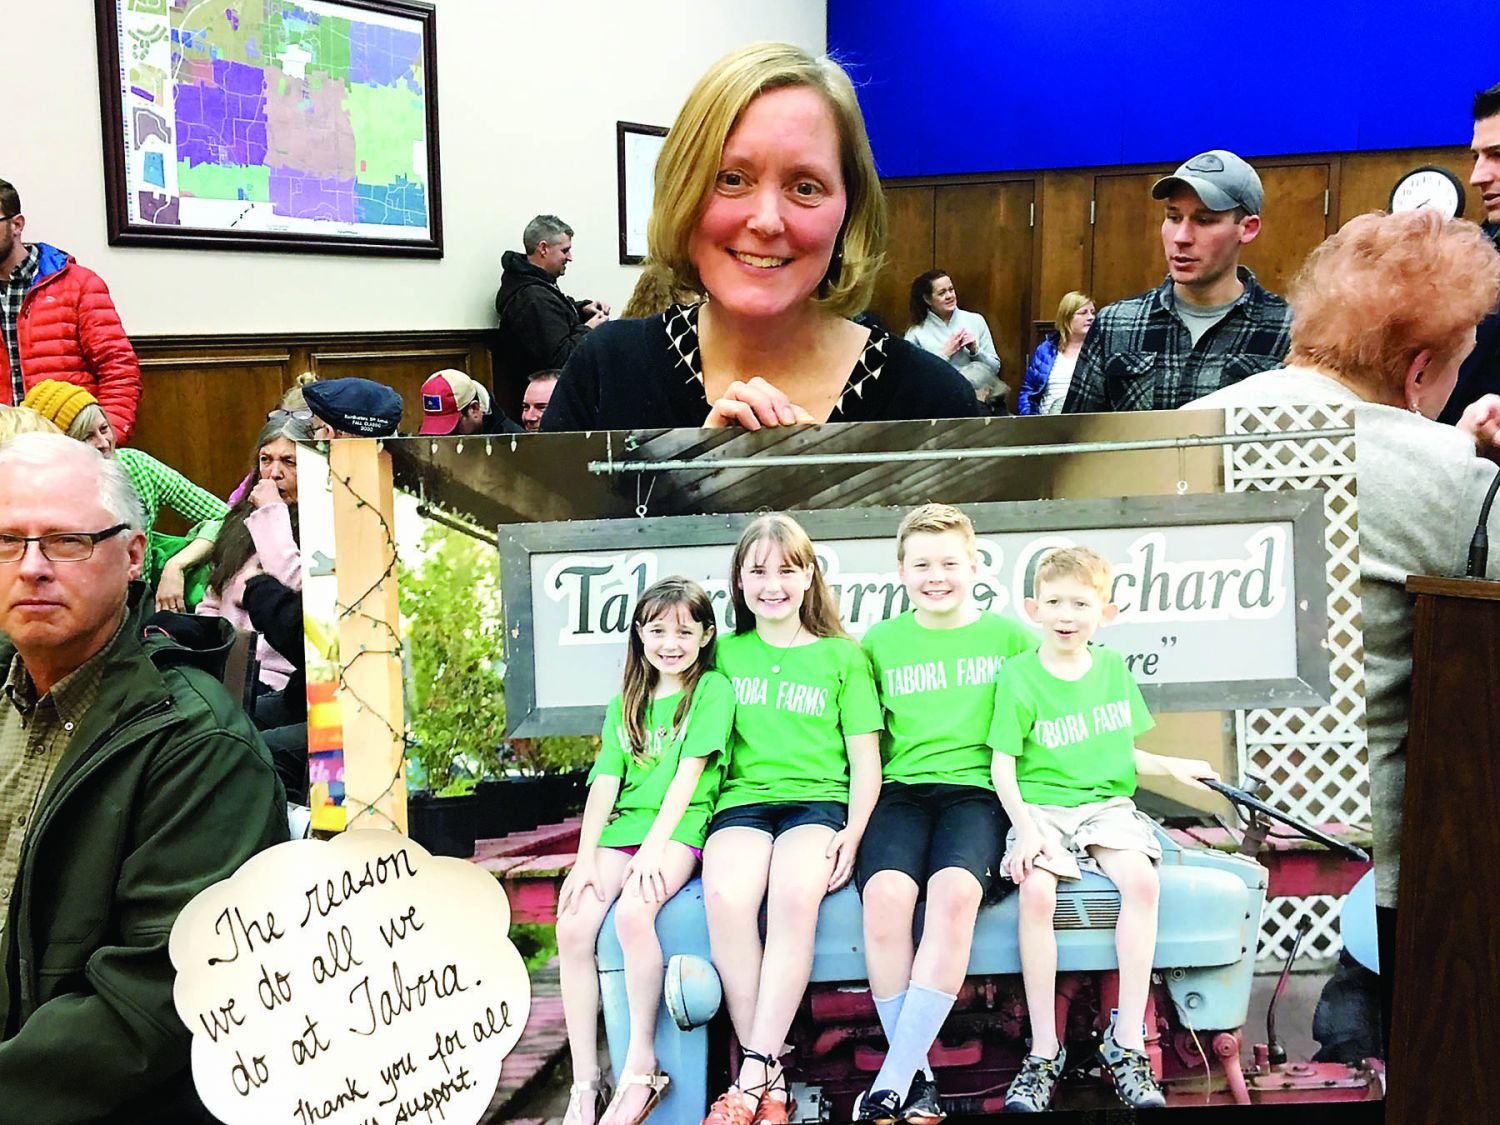 Patricia Torrice of Tabora Farms holds a photo of the Torrice children at a Hilltown Township meeting.